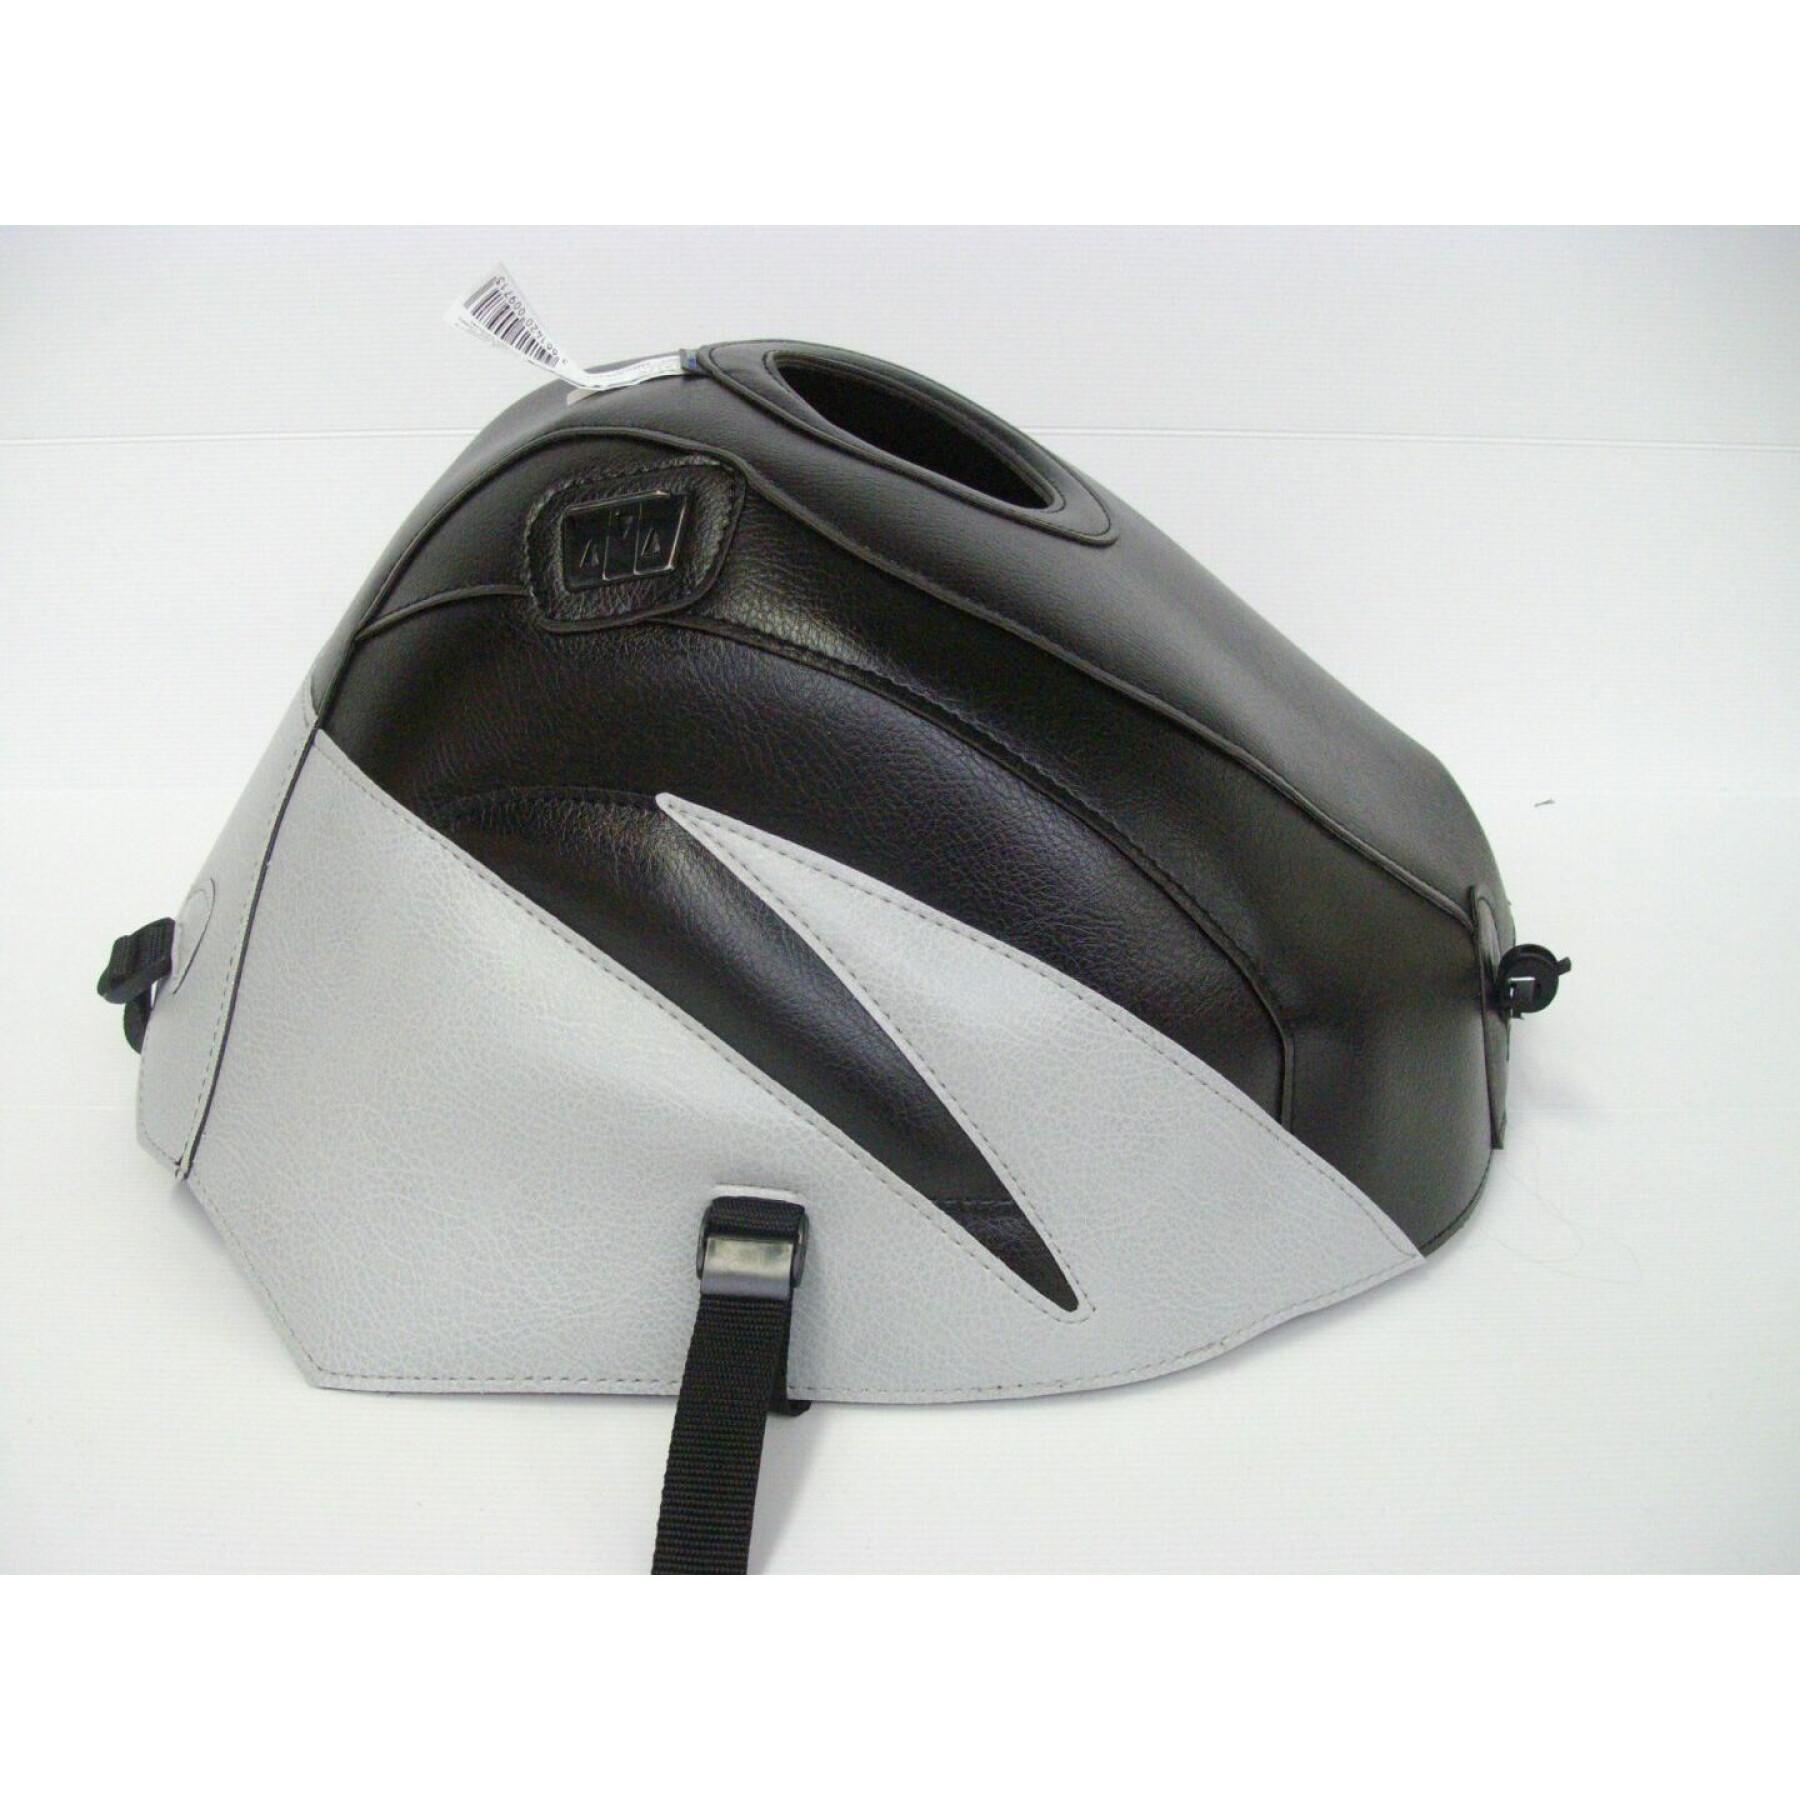 Motorcycle tank cover Bagster yzf 600 thunder cat